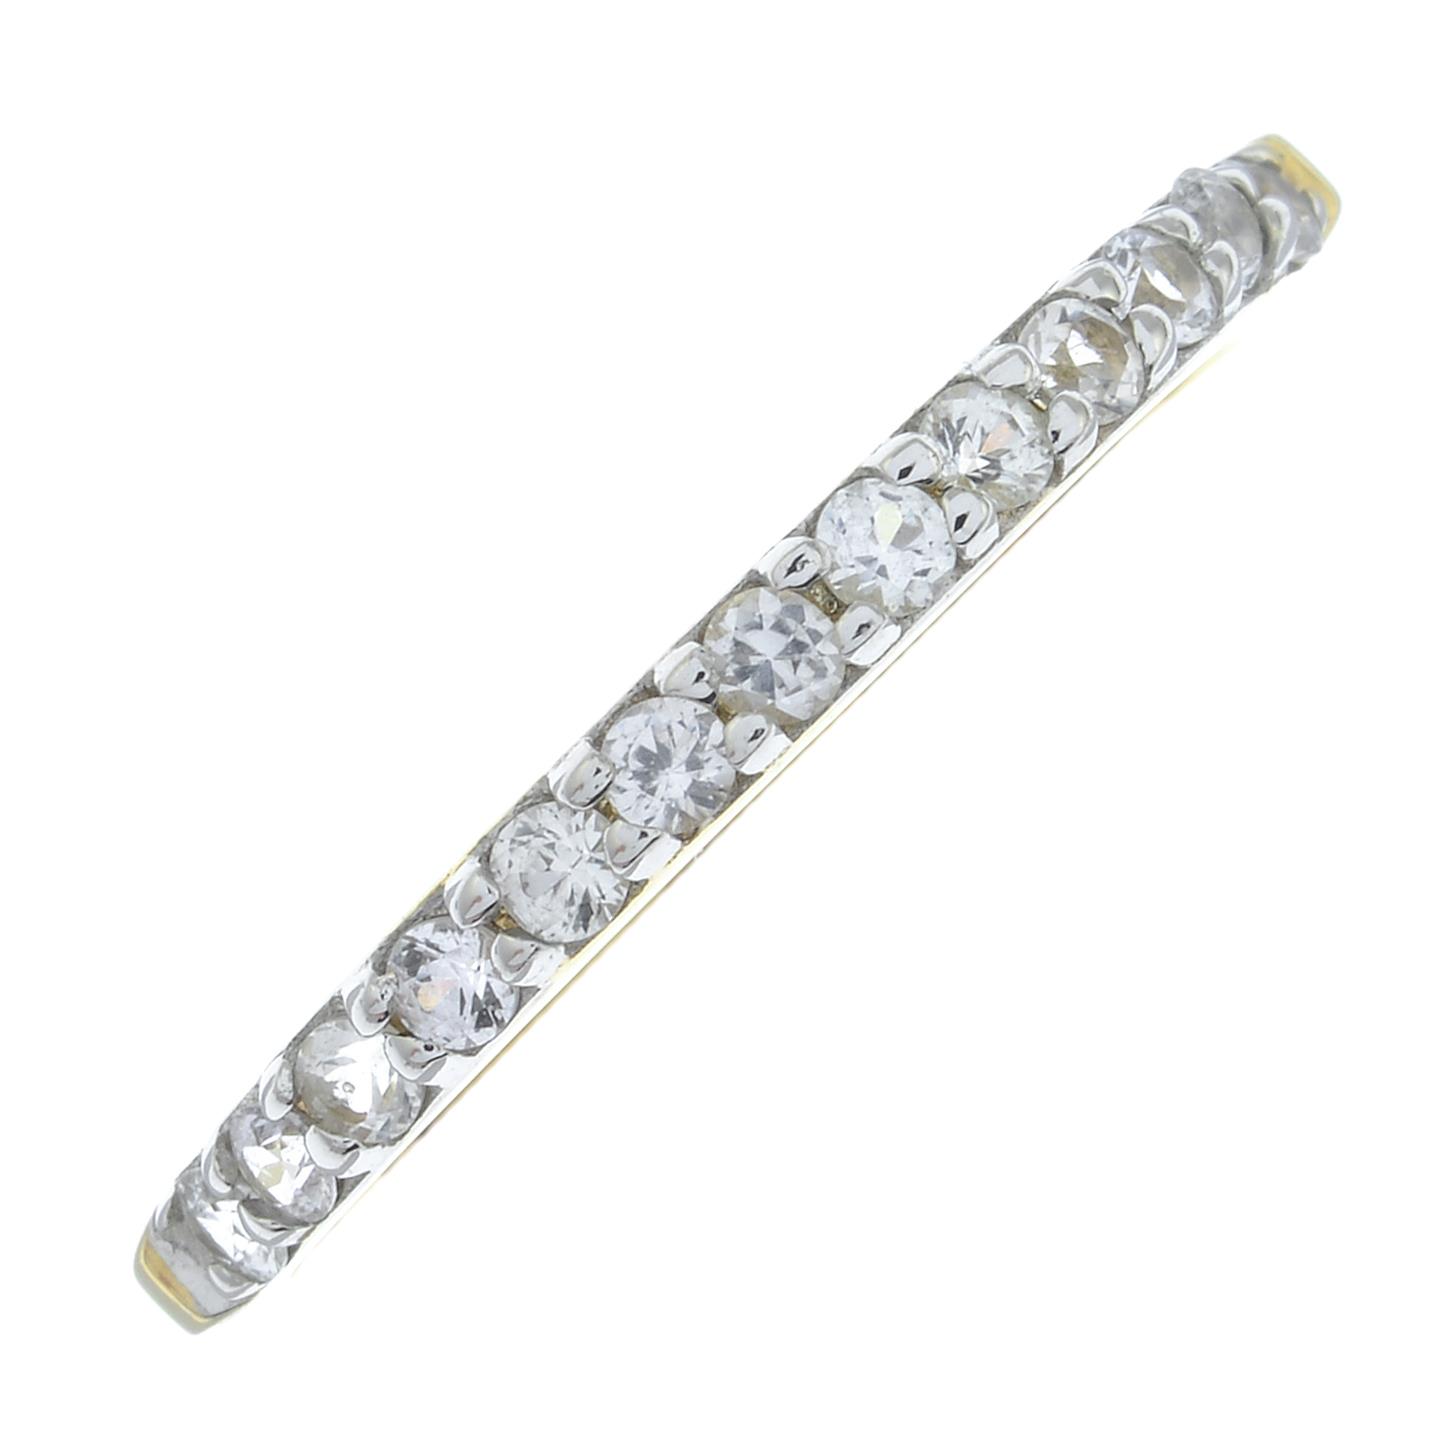 Seven 9ct gold white sapphire and colourless zircon half eternity rings.Hallmarks for 9ct gold.